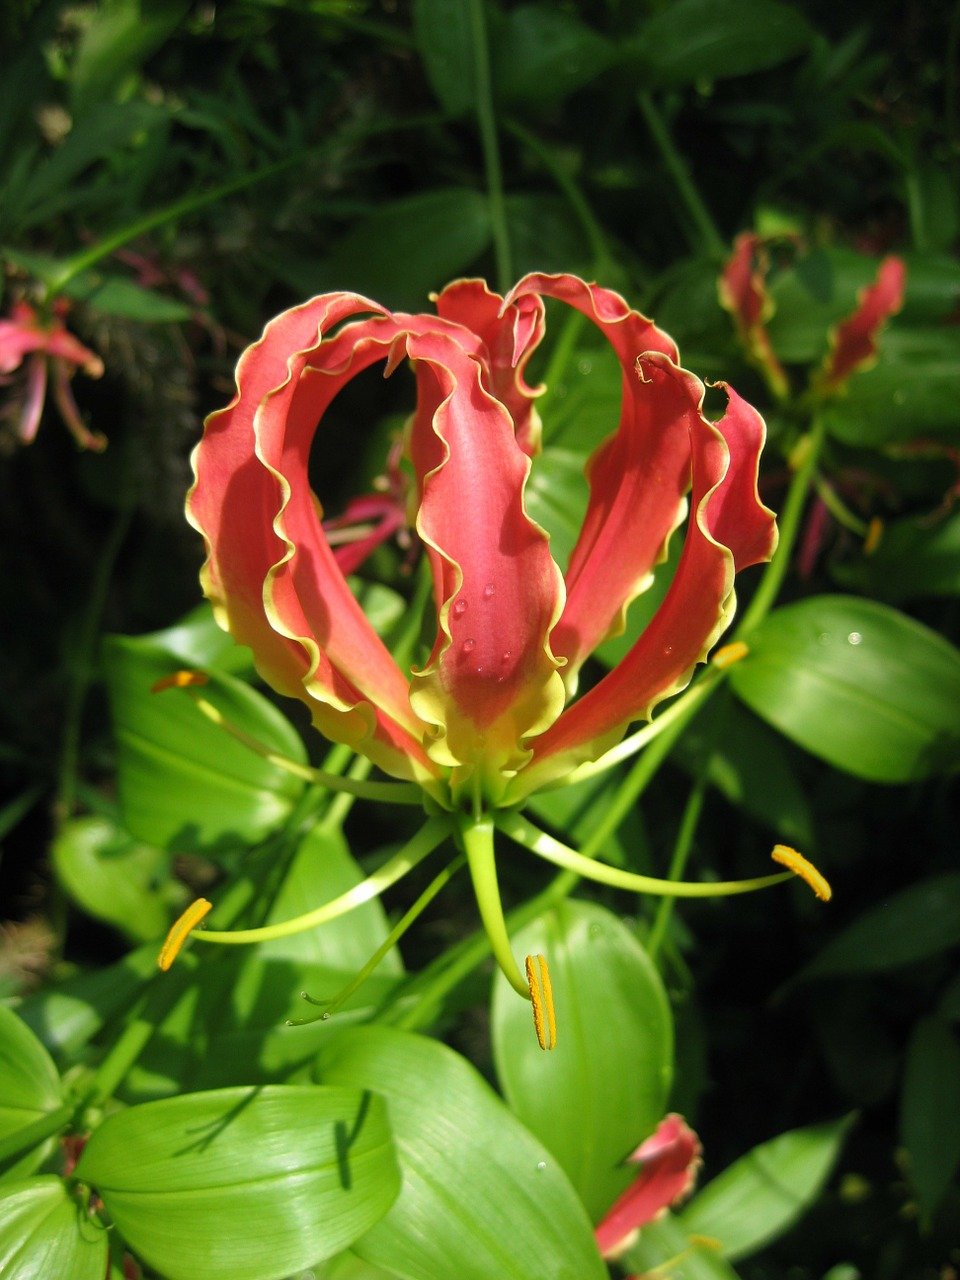 Gloriosa lily: Easy to grow Perennial climbers with unique flowers